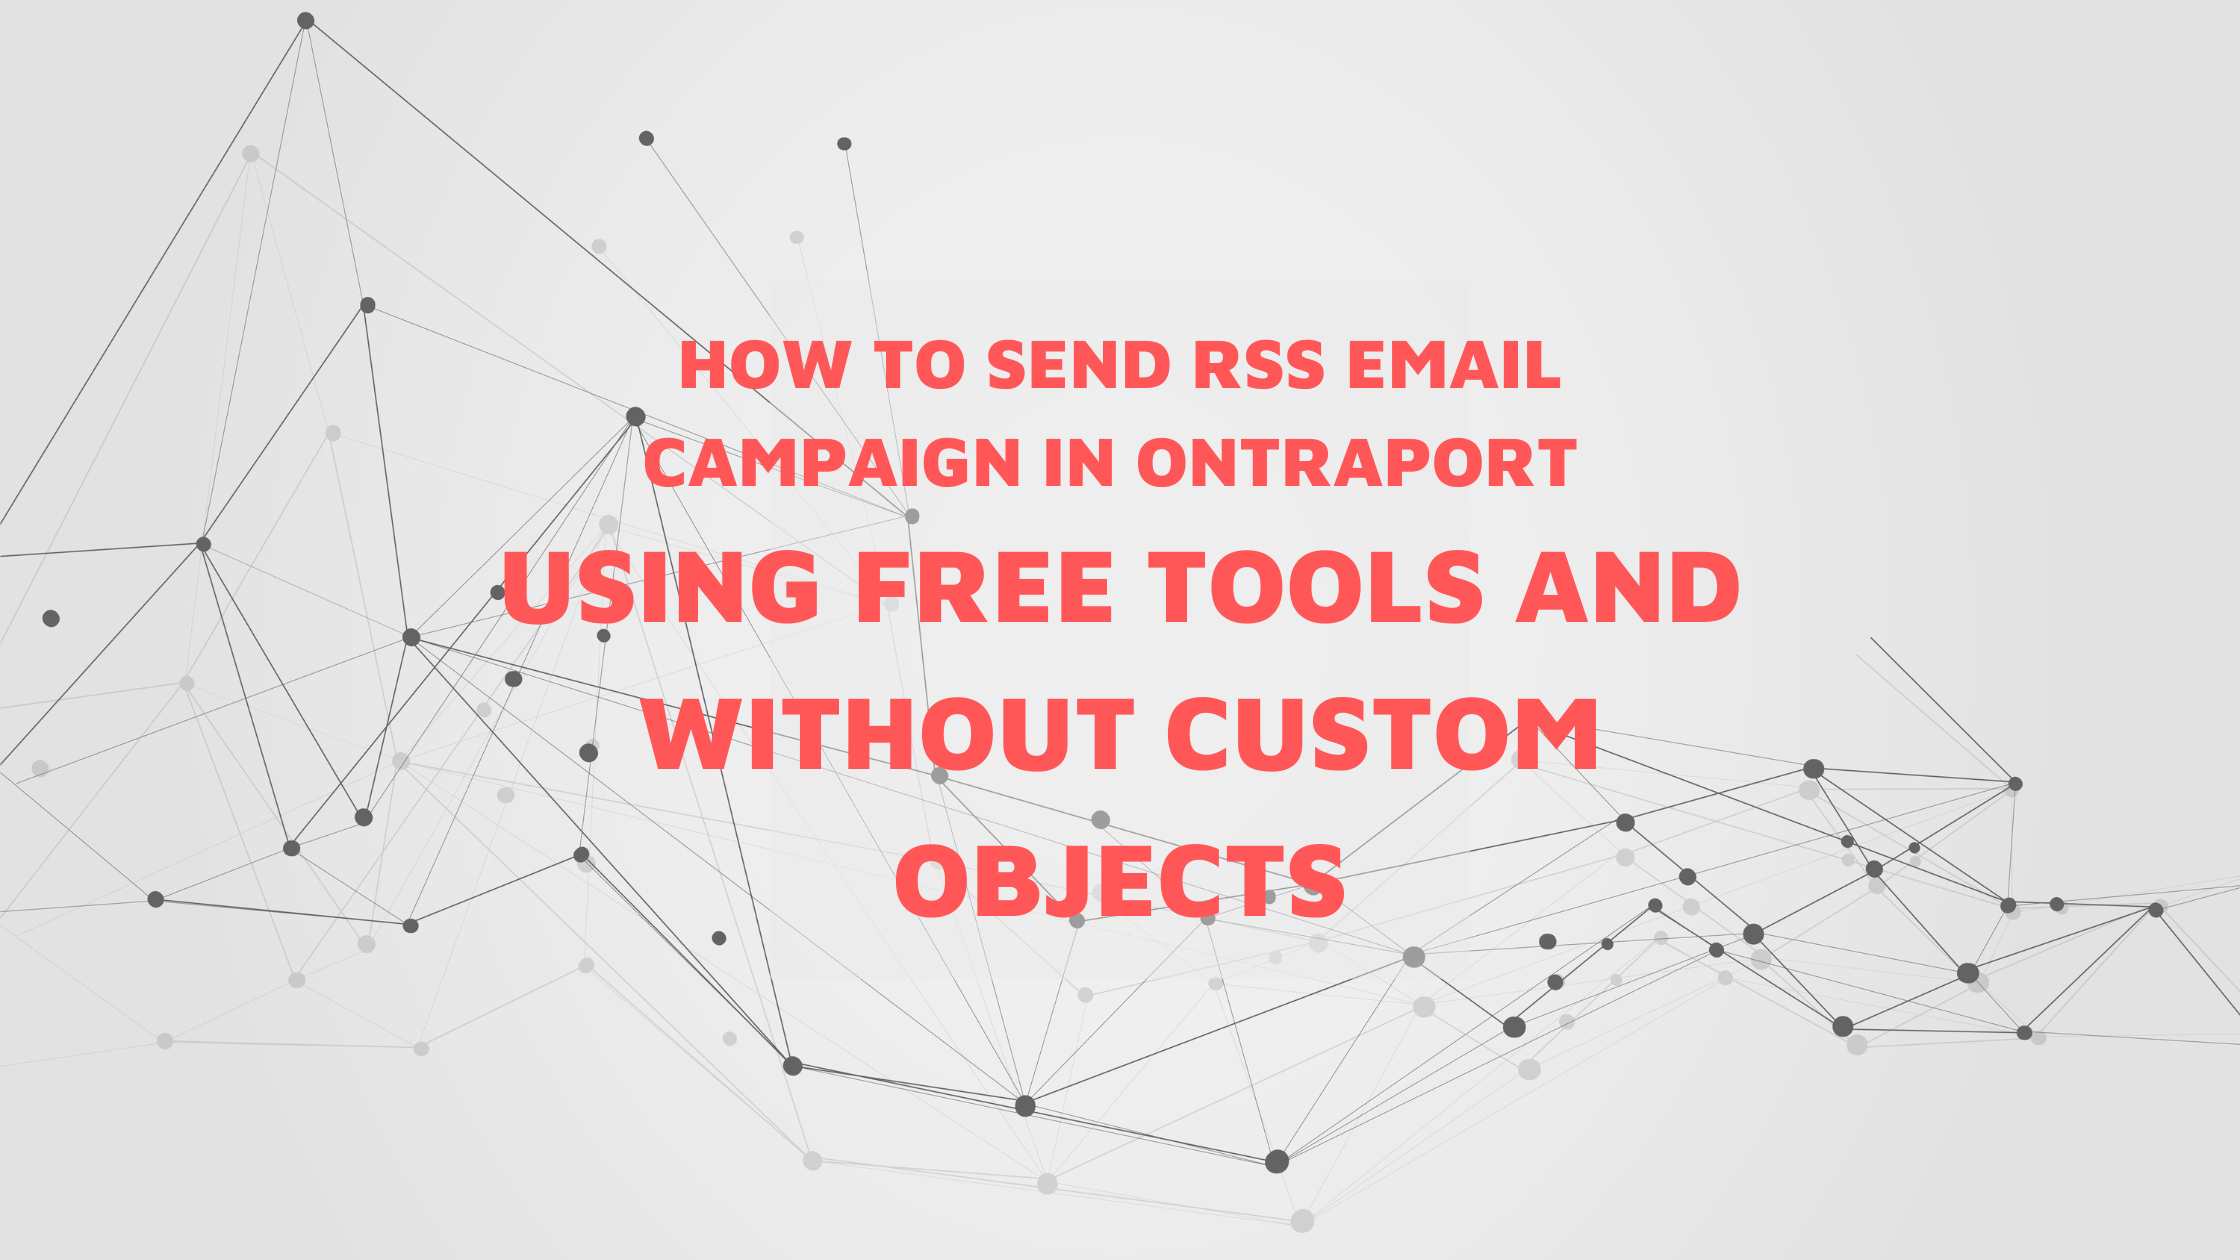 How to send rss email campaign in Ontraport using free tools and without Custom objects